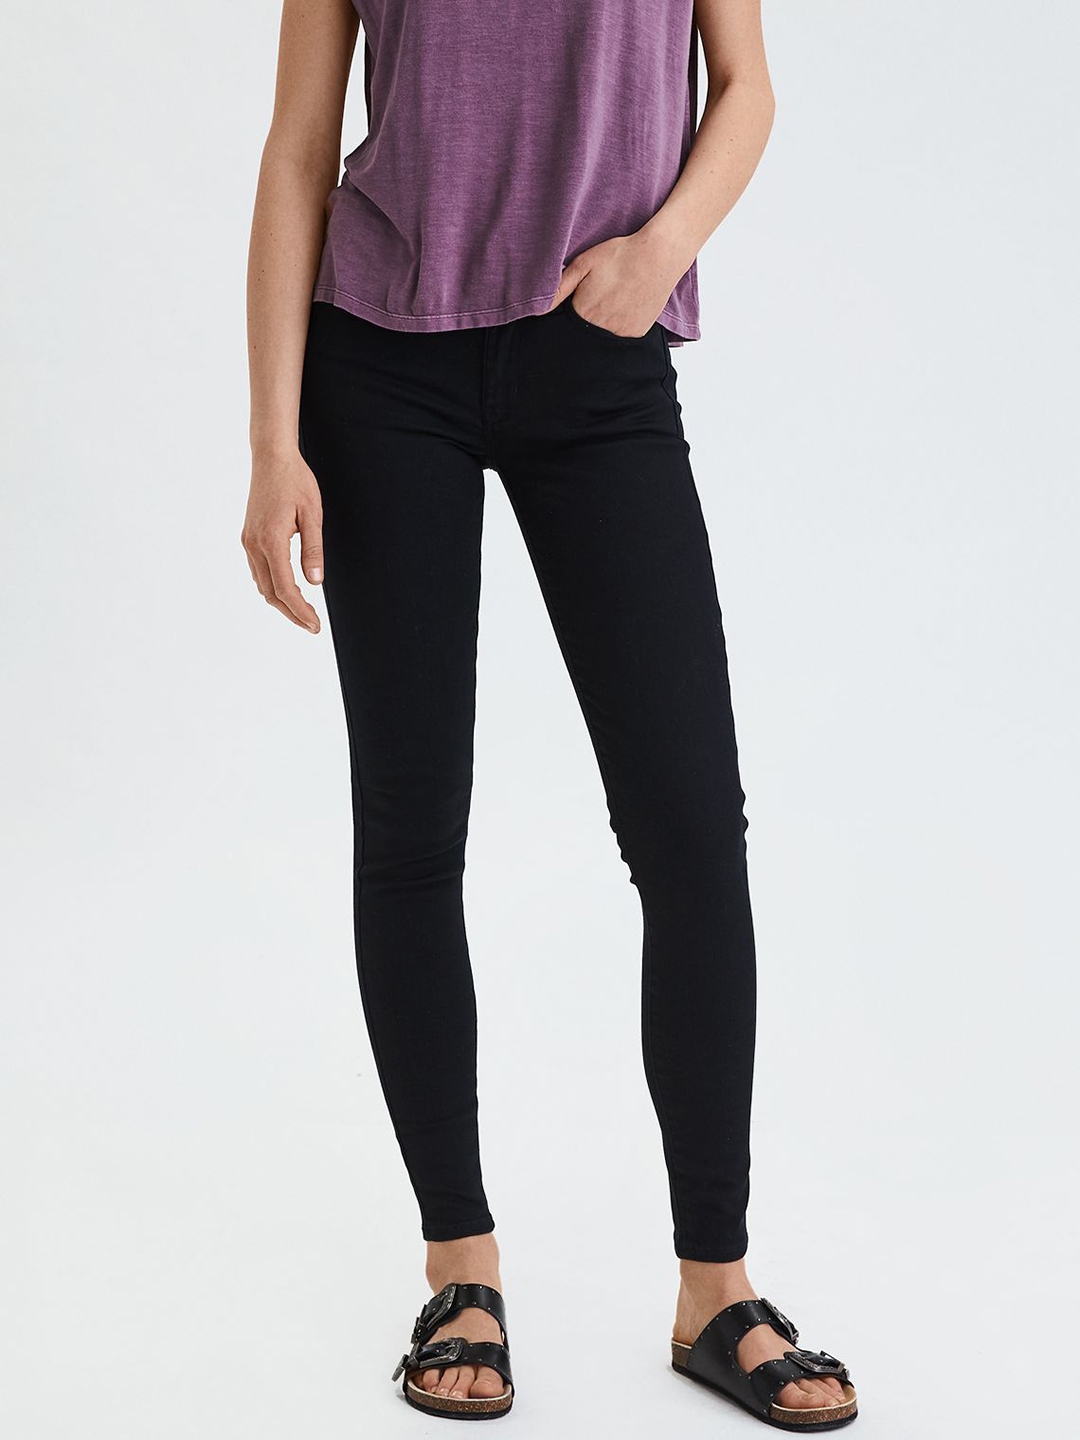 Buy AMERICAN EAGLE OUTFITTERS Women Black Skinny Fit Mid Rise